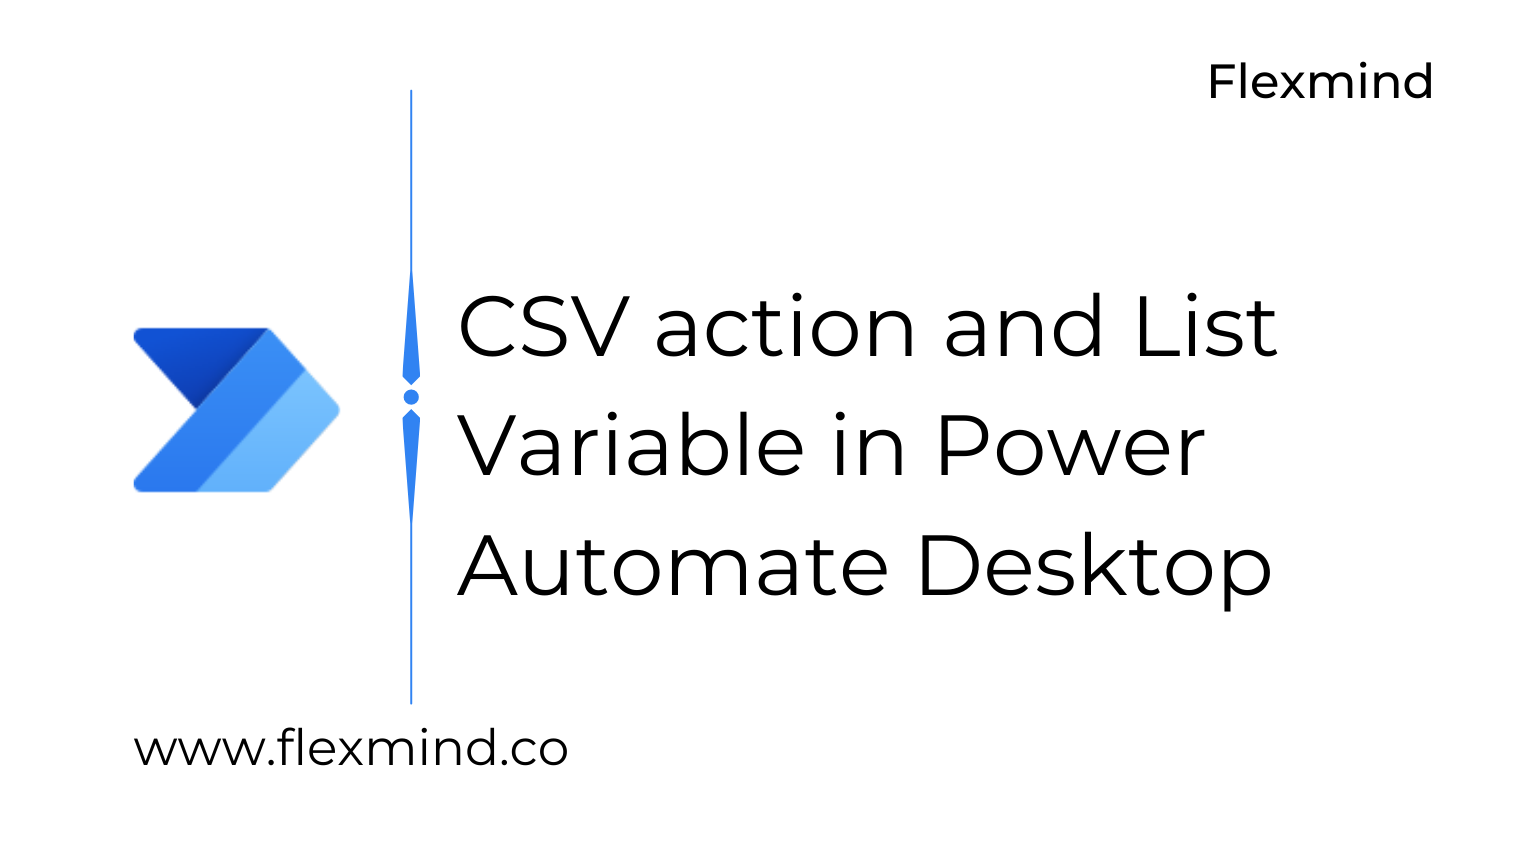 CSV and List in PAD